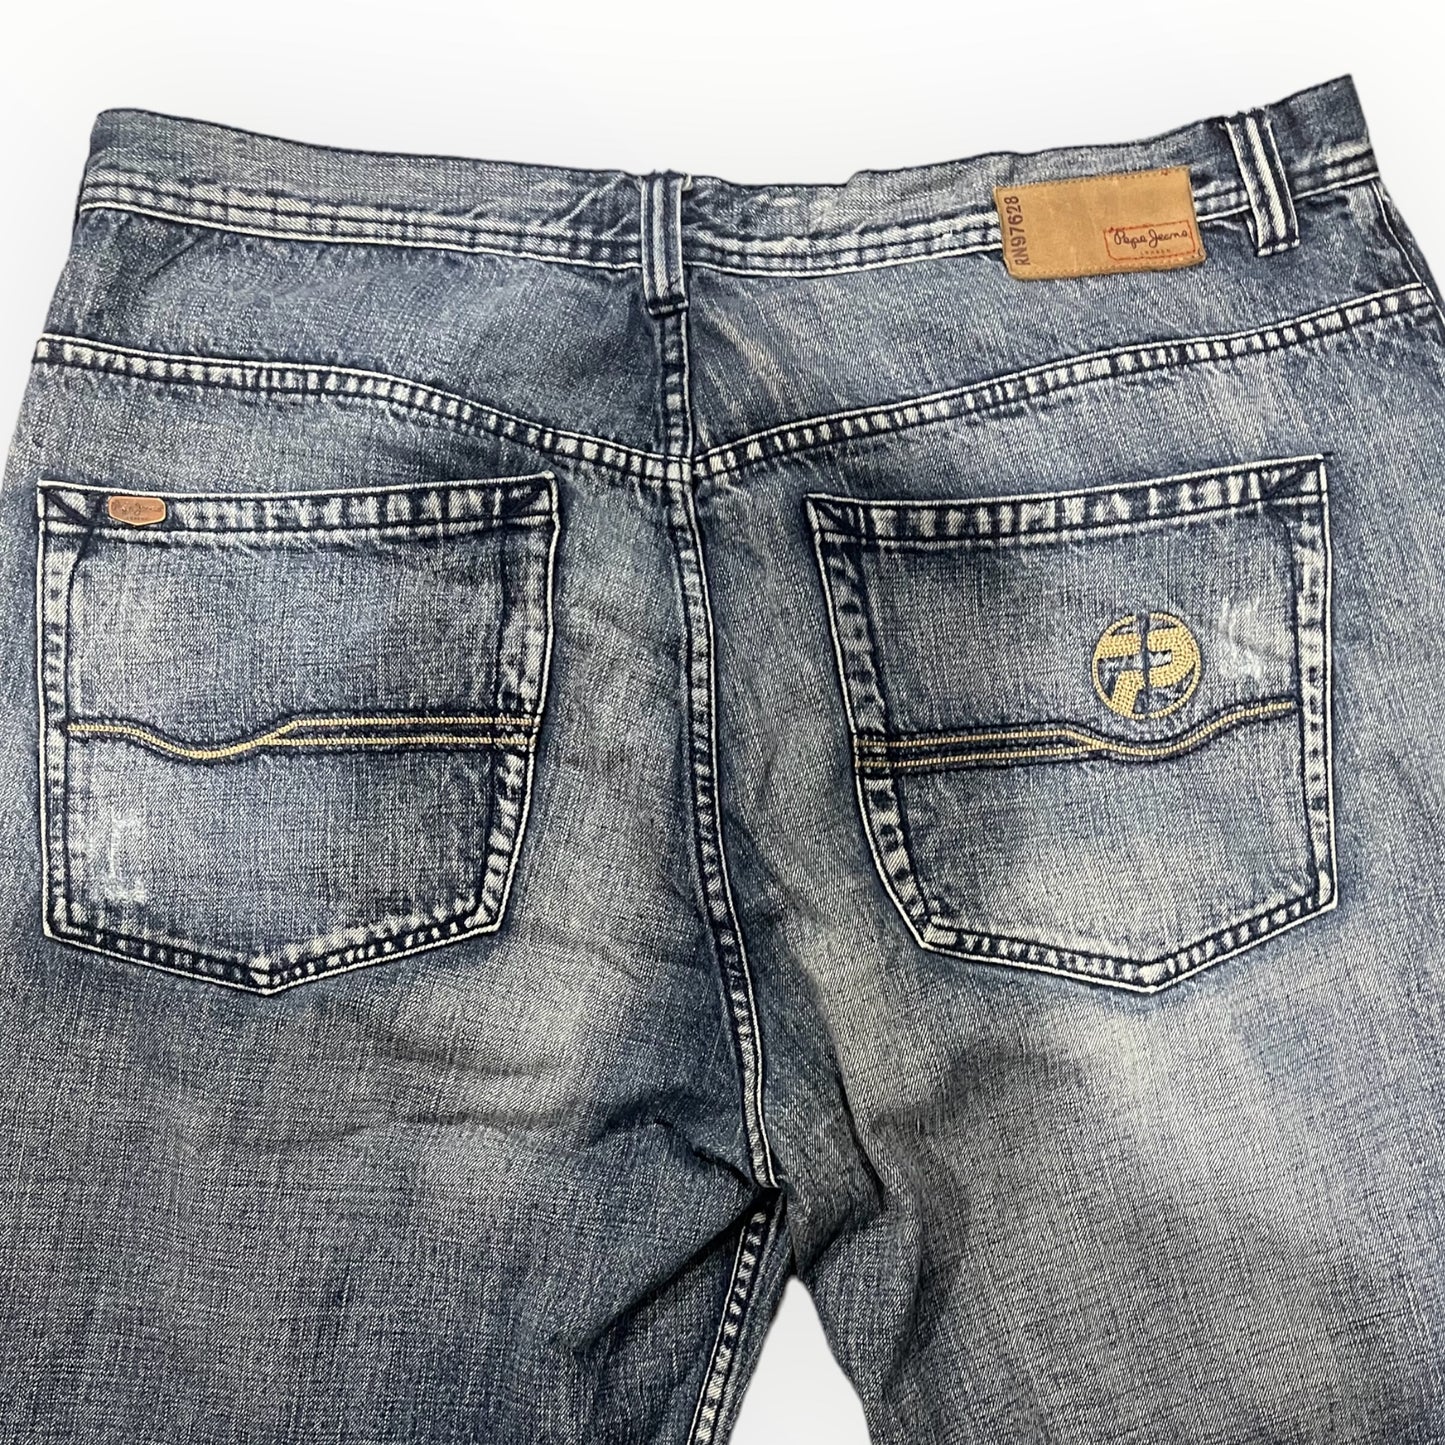 HXND MXDE Denim Washed Pepe Jeans